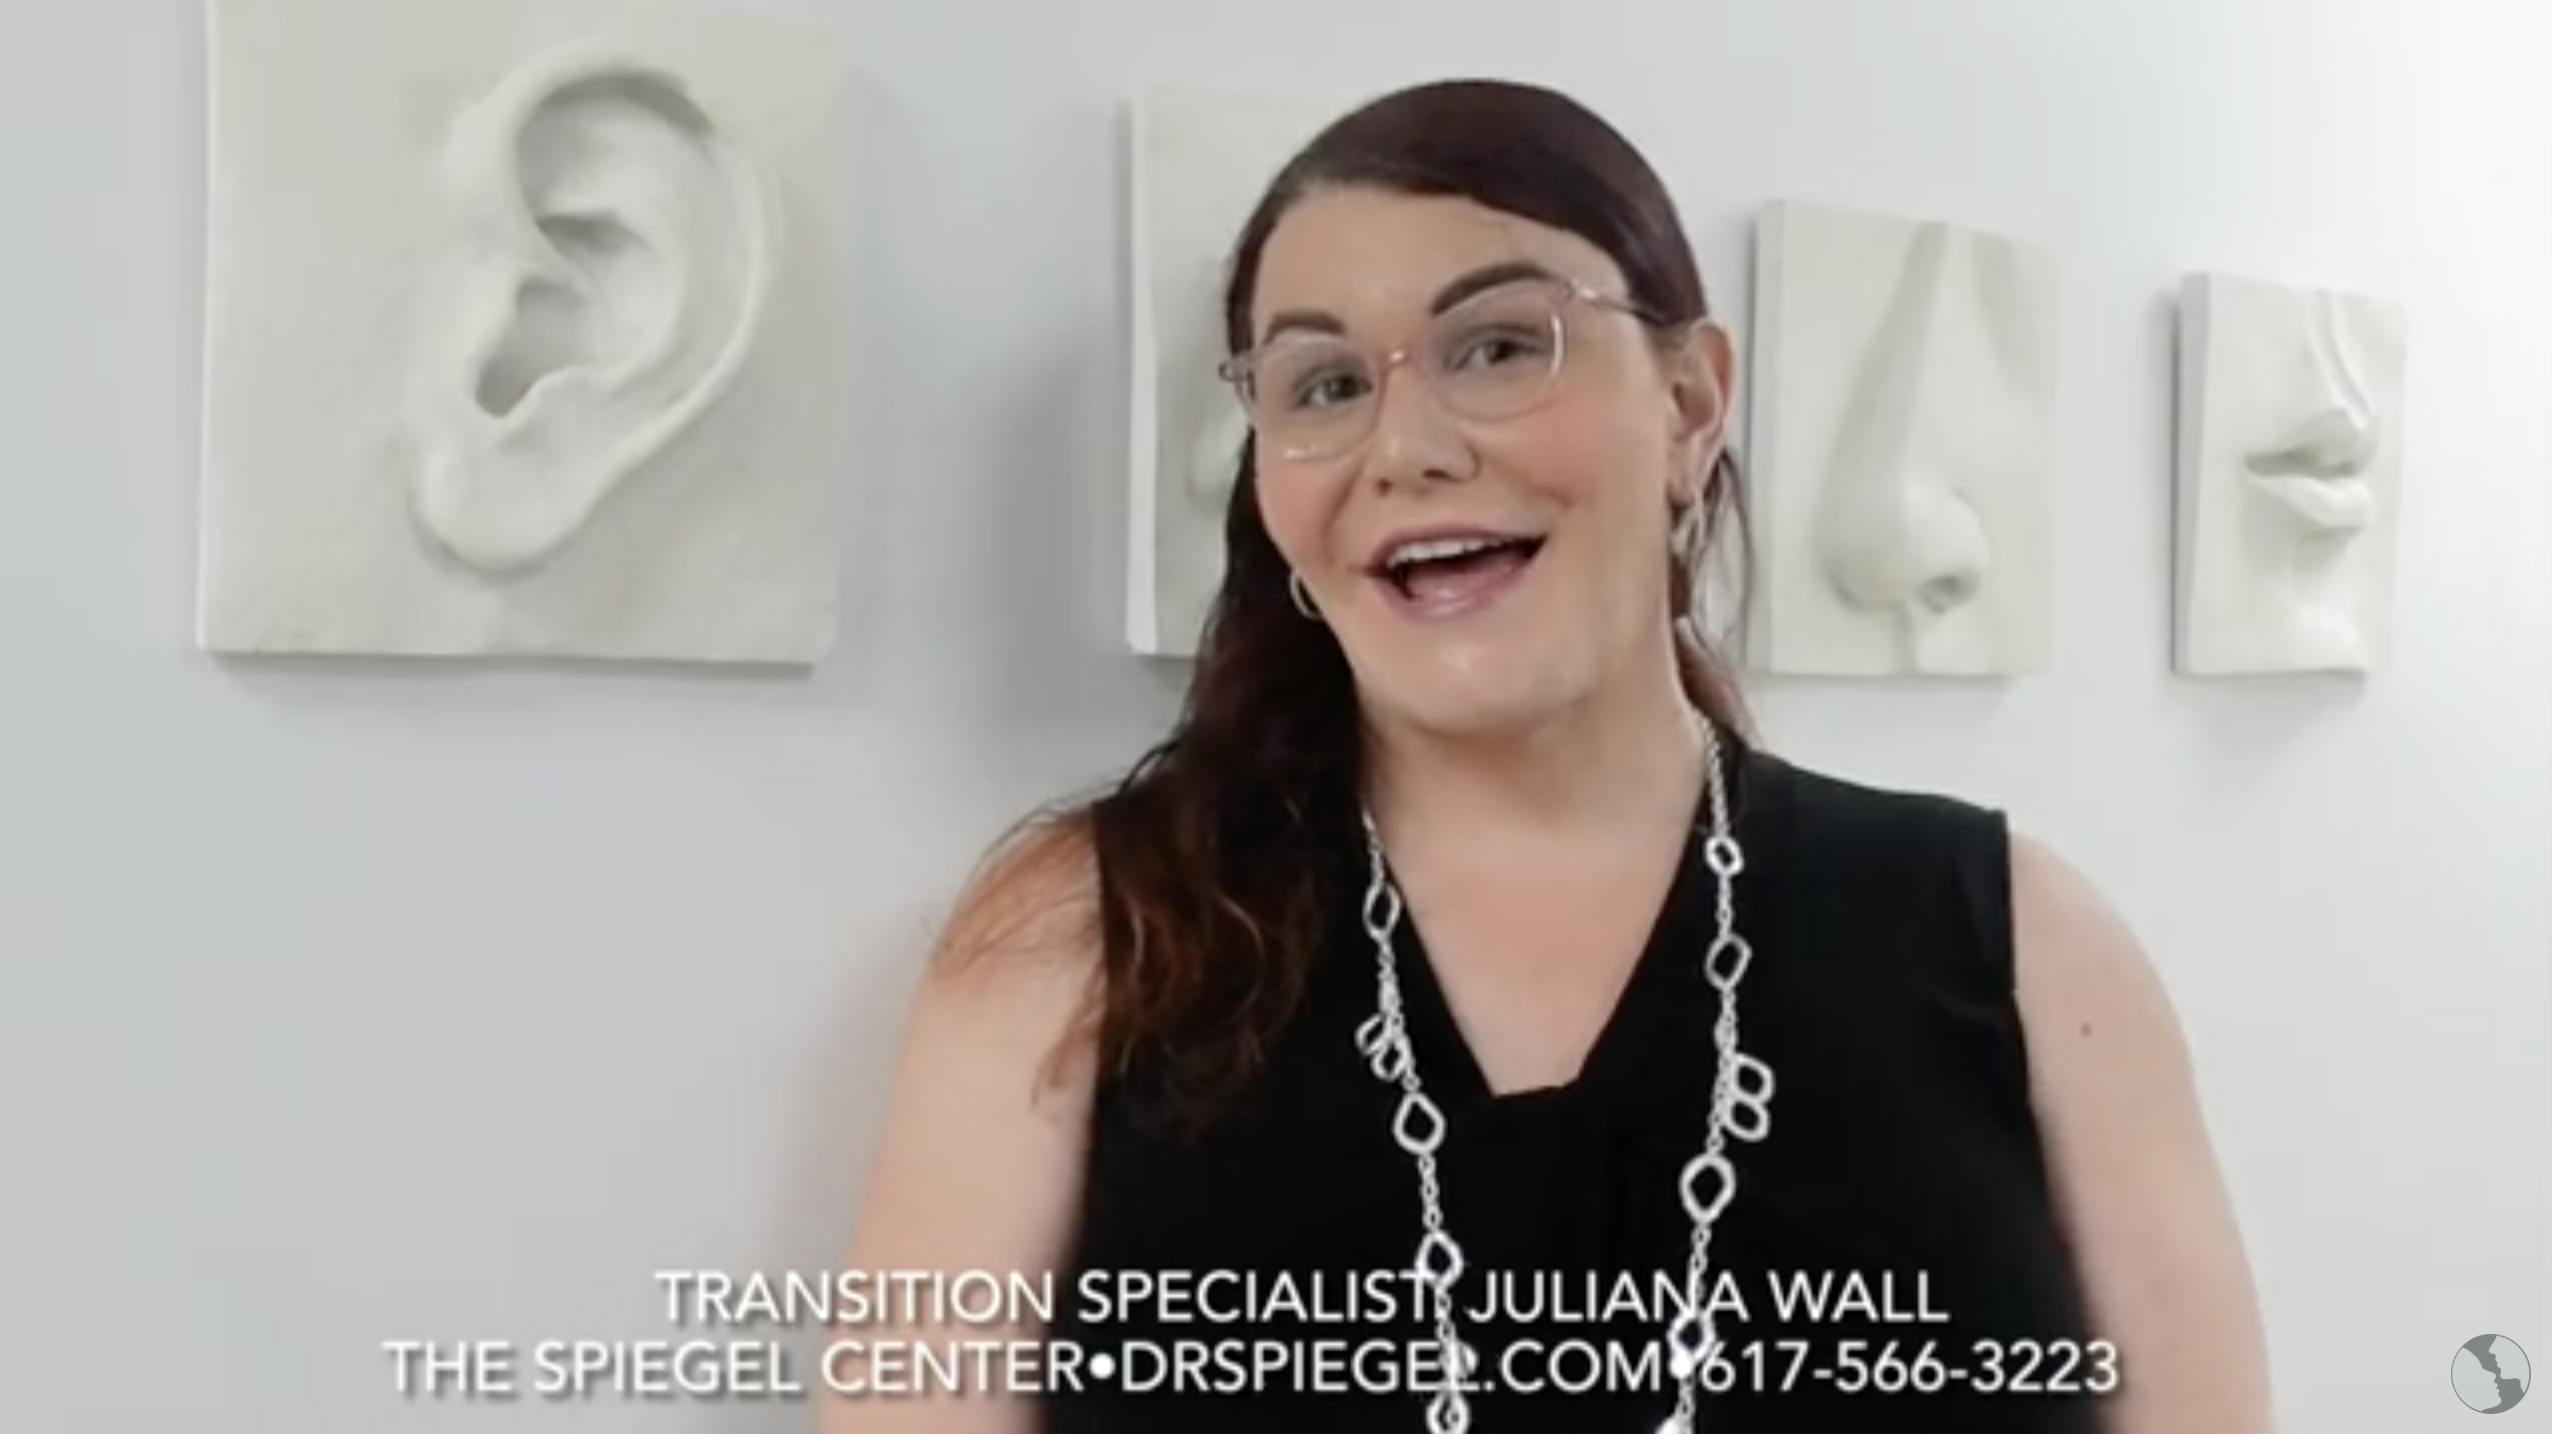 Woman speaking about transition surgery